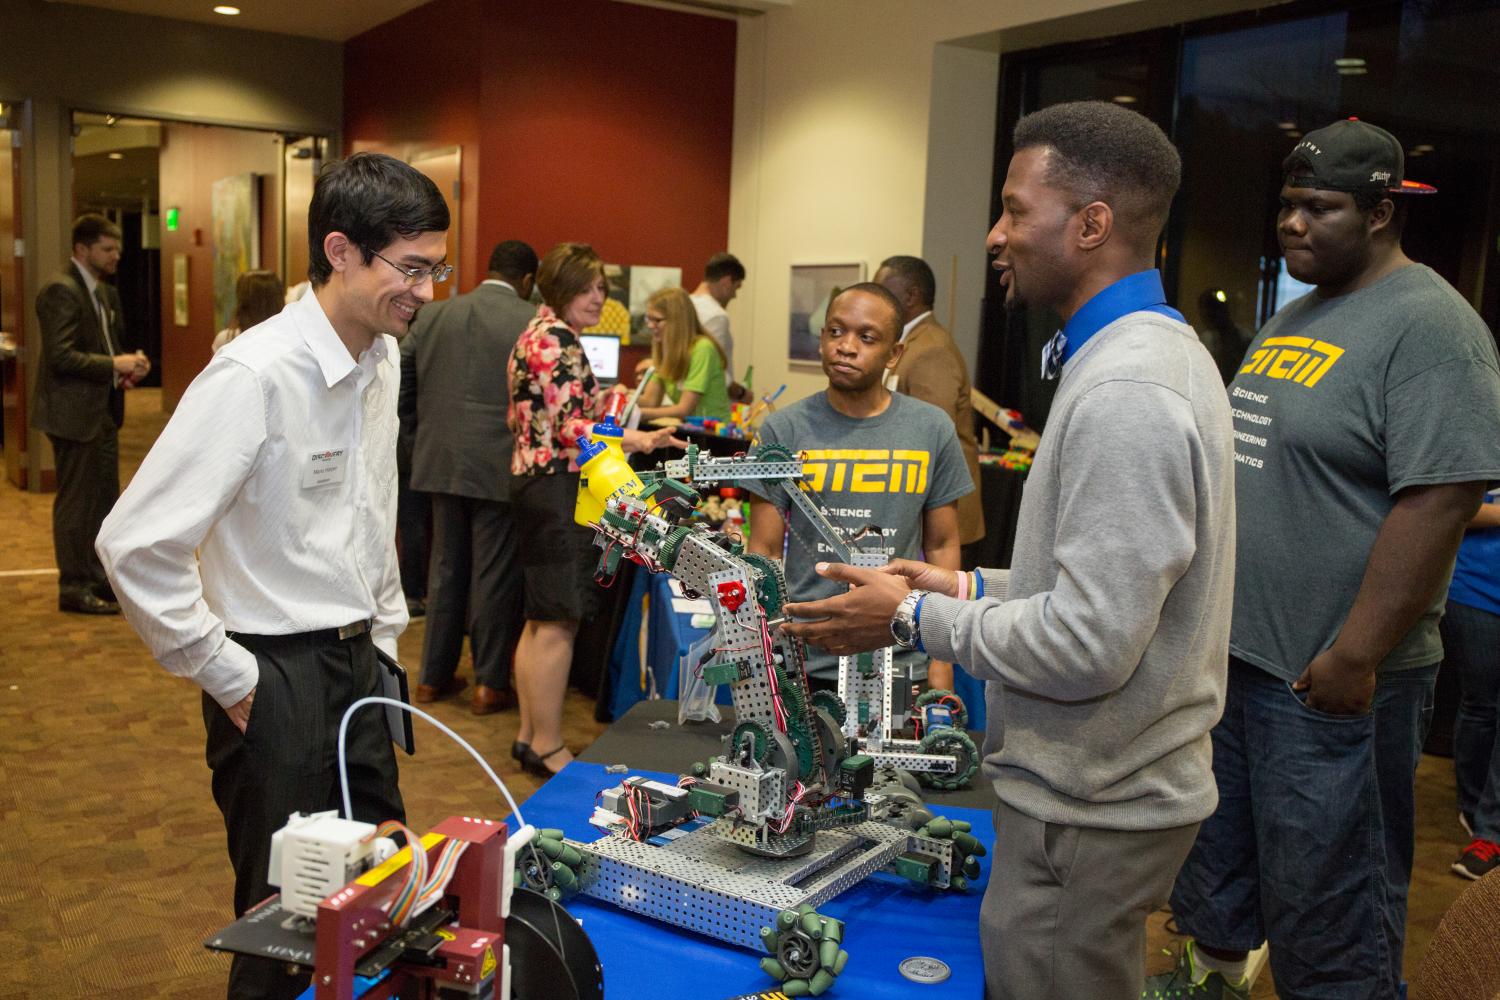 Three students excitedly present their robot project to an exhibitor at a conference.